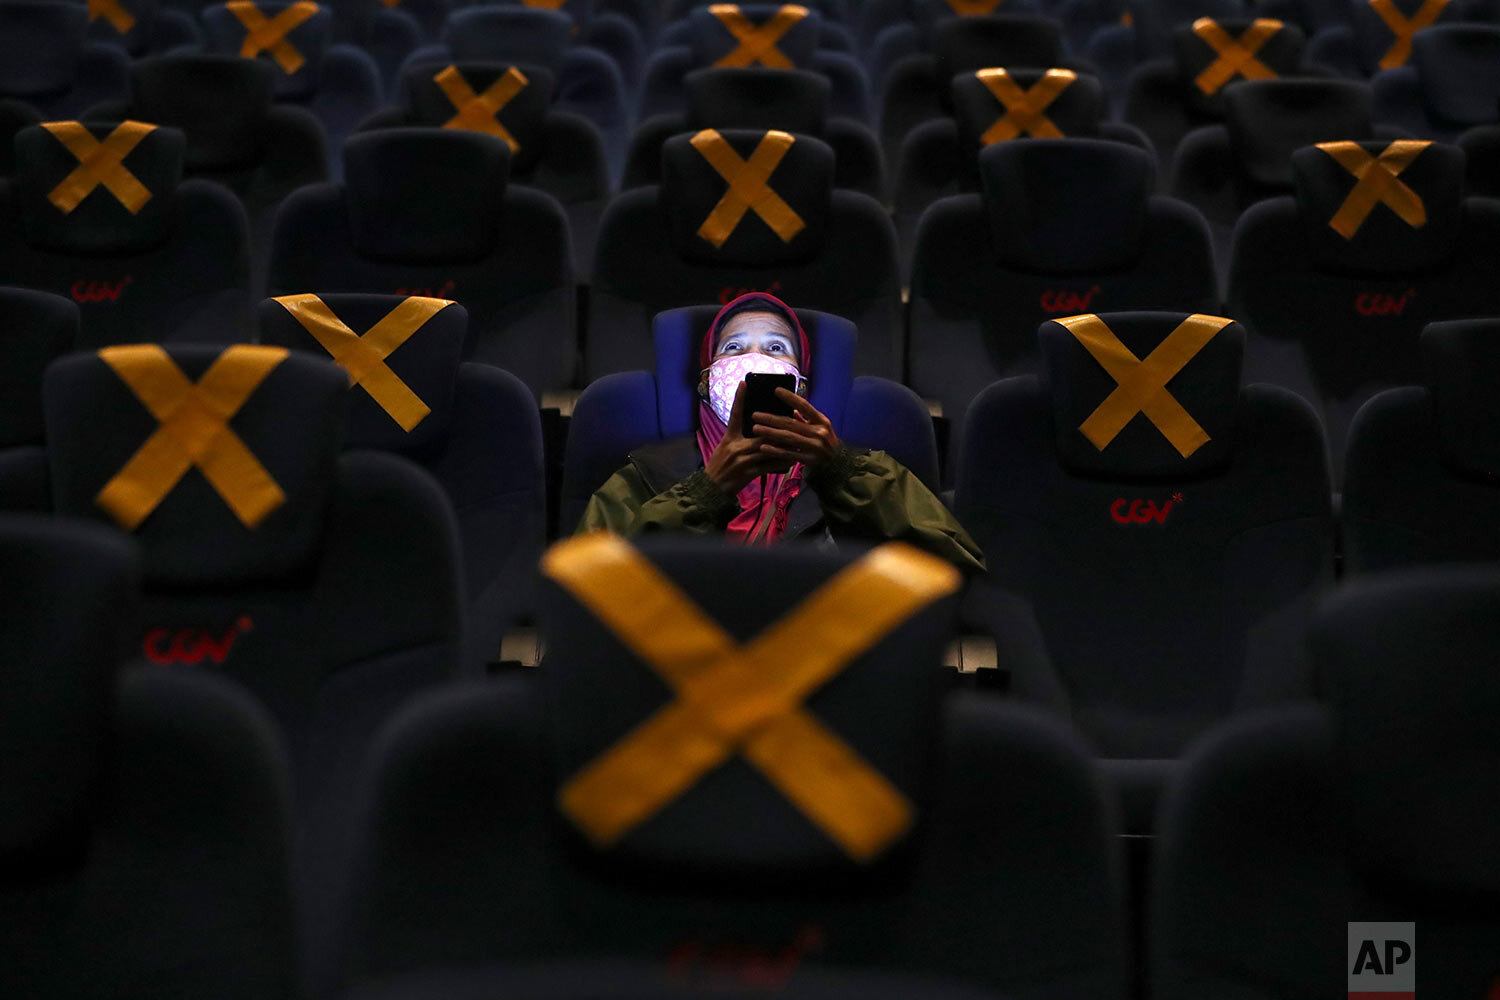  A customer uses her mobile phone before the start of a movie as she sits amid physical distancing markers during the first day of reopening at a cinema in Jakarta, Indonesia, Thursday, Sept. 16, 2021.  (AP Photo/Tatan Syuflana) 